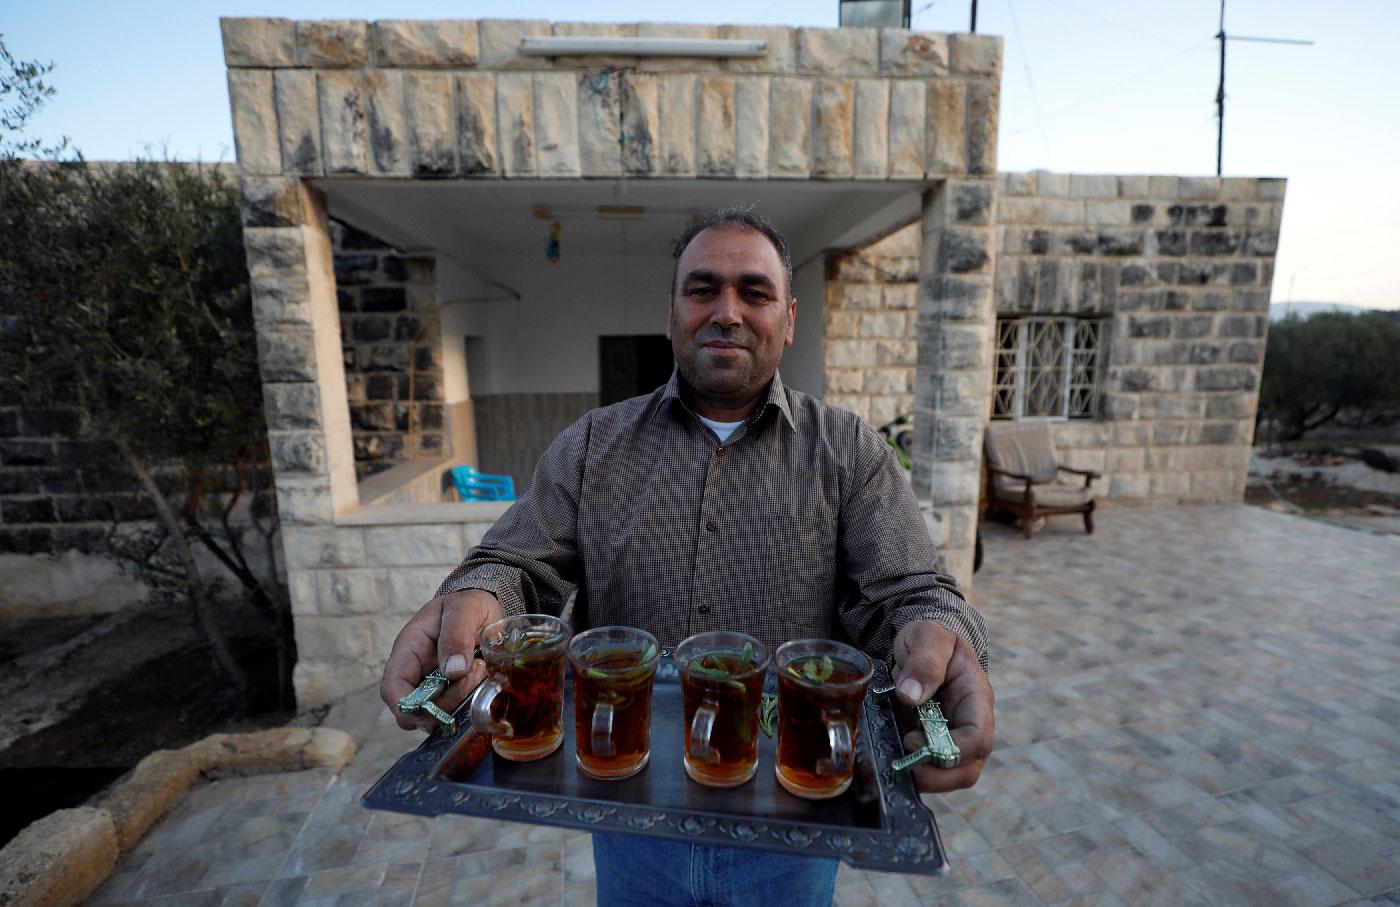 The uncle of Rashida Tlaib, the first Palestinian-American woman to be elected to the U.S. Congress, offers tea after her victory, in Beit Ur Al-Fauqa, in the occupied West Bank November 7, 2018. 